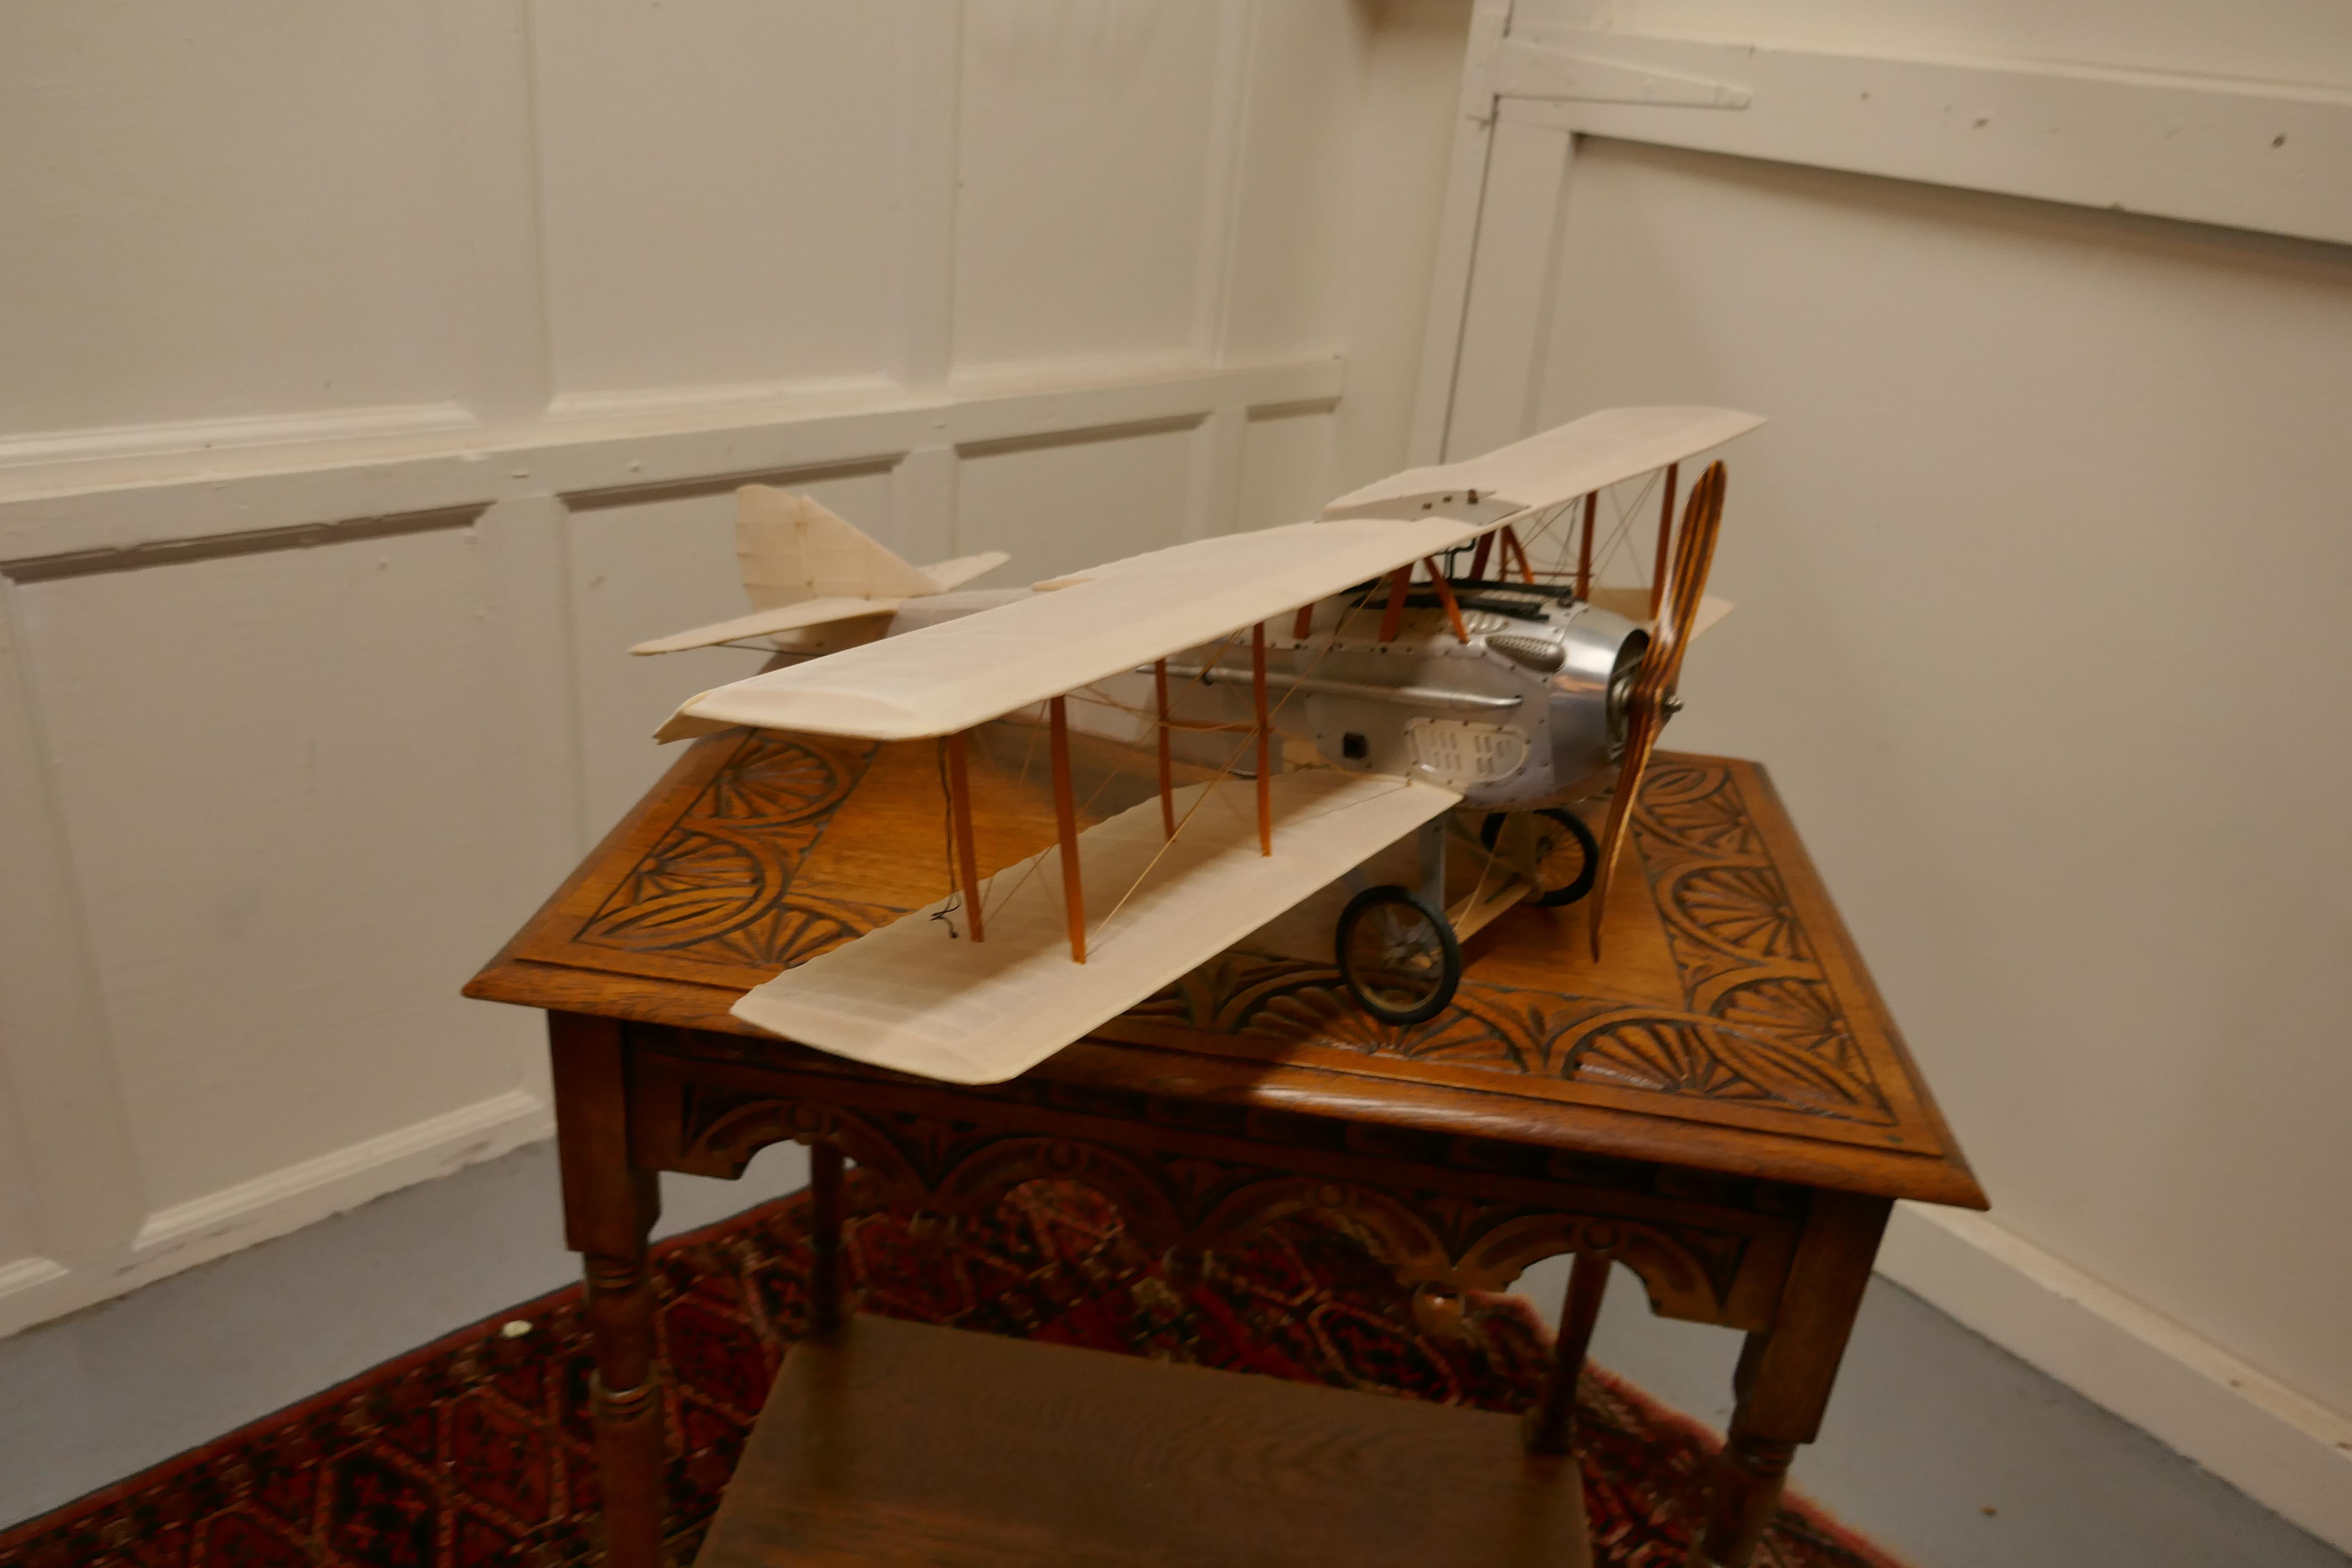 Model of a French WW1 Biplane in wood

This is a model of an SPAD S.XIII First World War Fighter Biplane

 The model is made in wood which is covered in a very fine Silk muslin, the engine cover is riveted steel, the detail is excellent down to